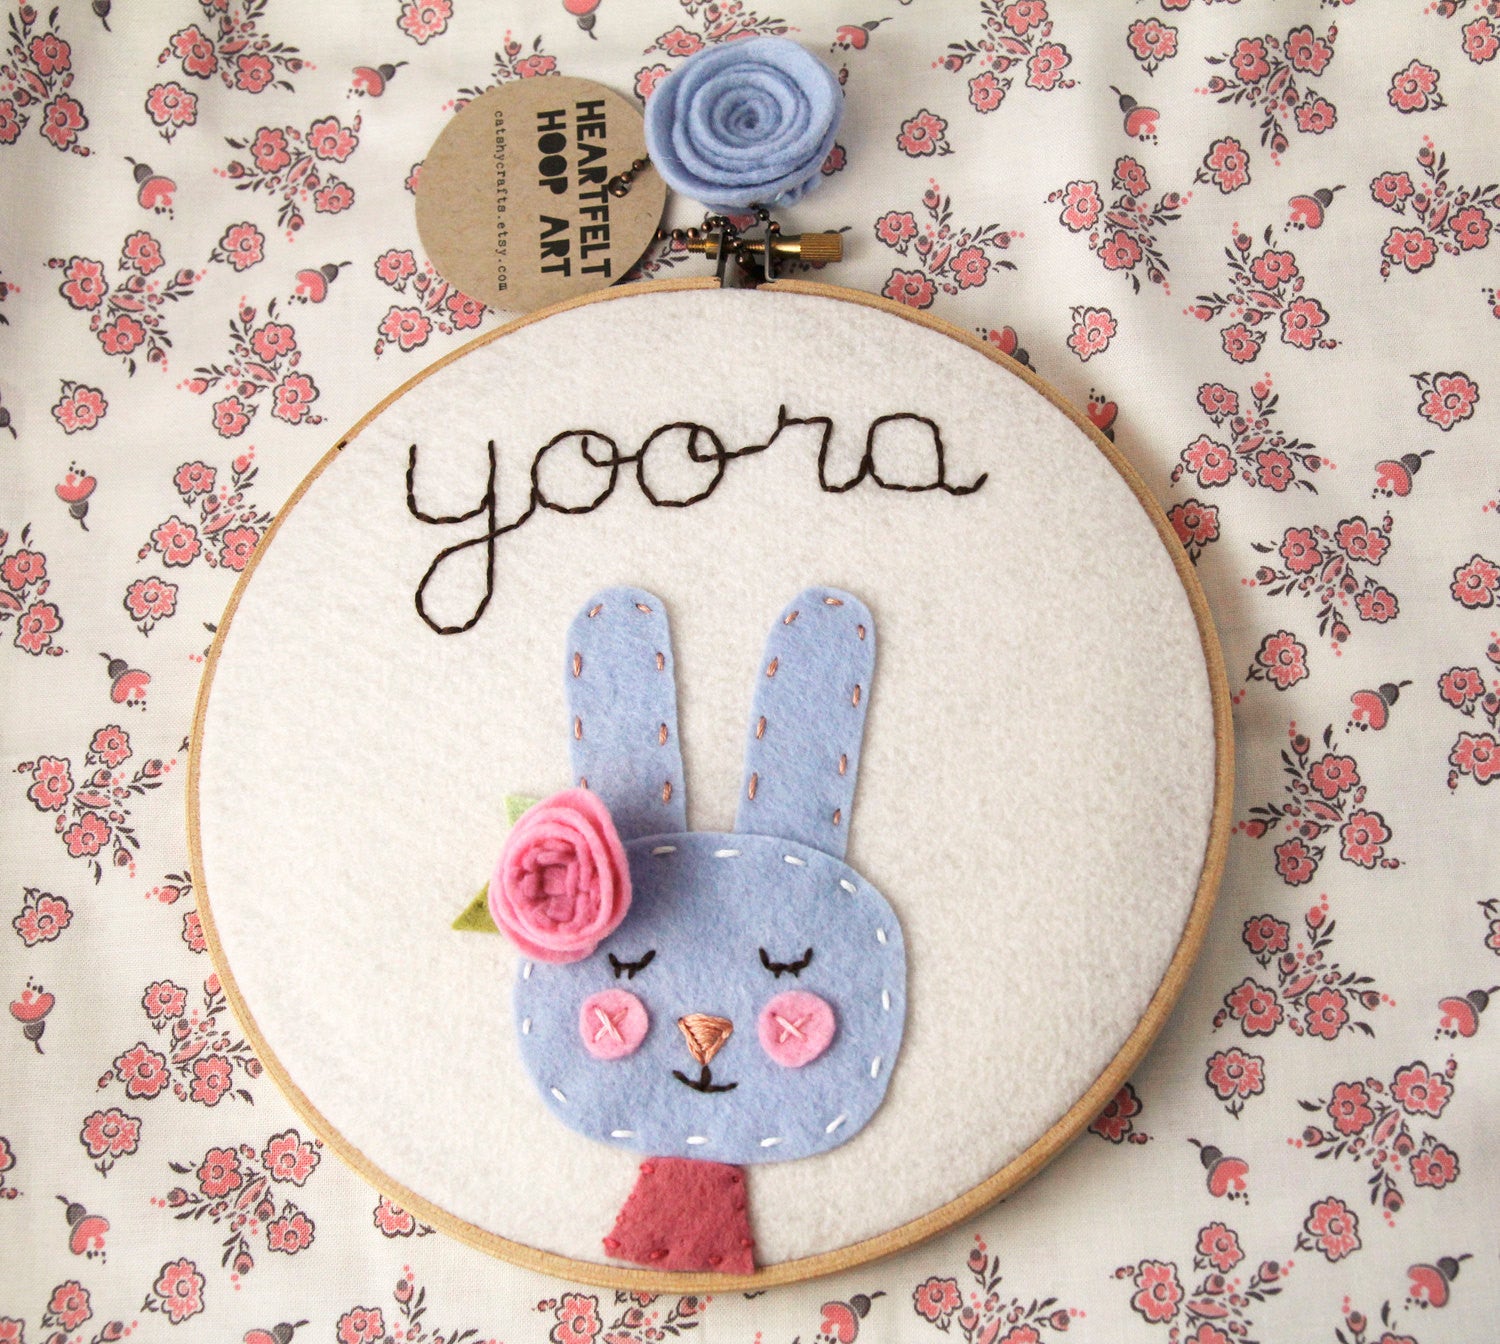 Personalized Bunny Embroidery Hoop Art